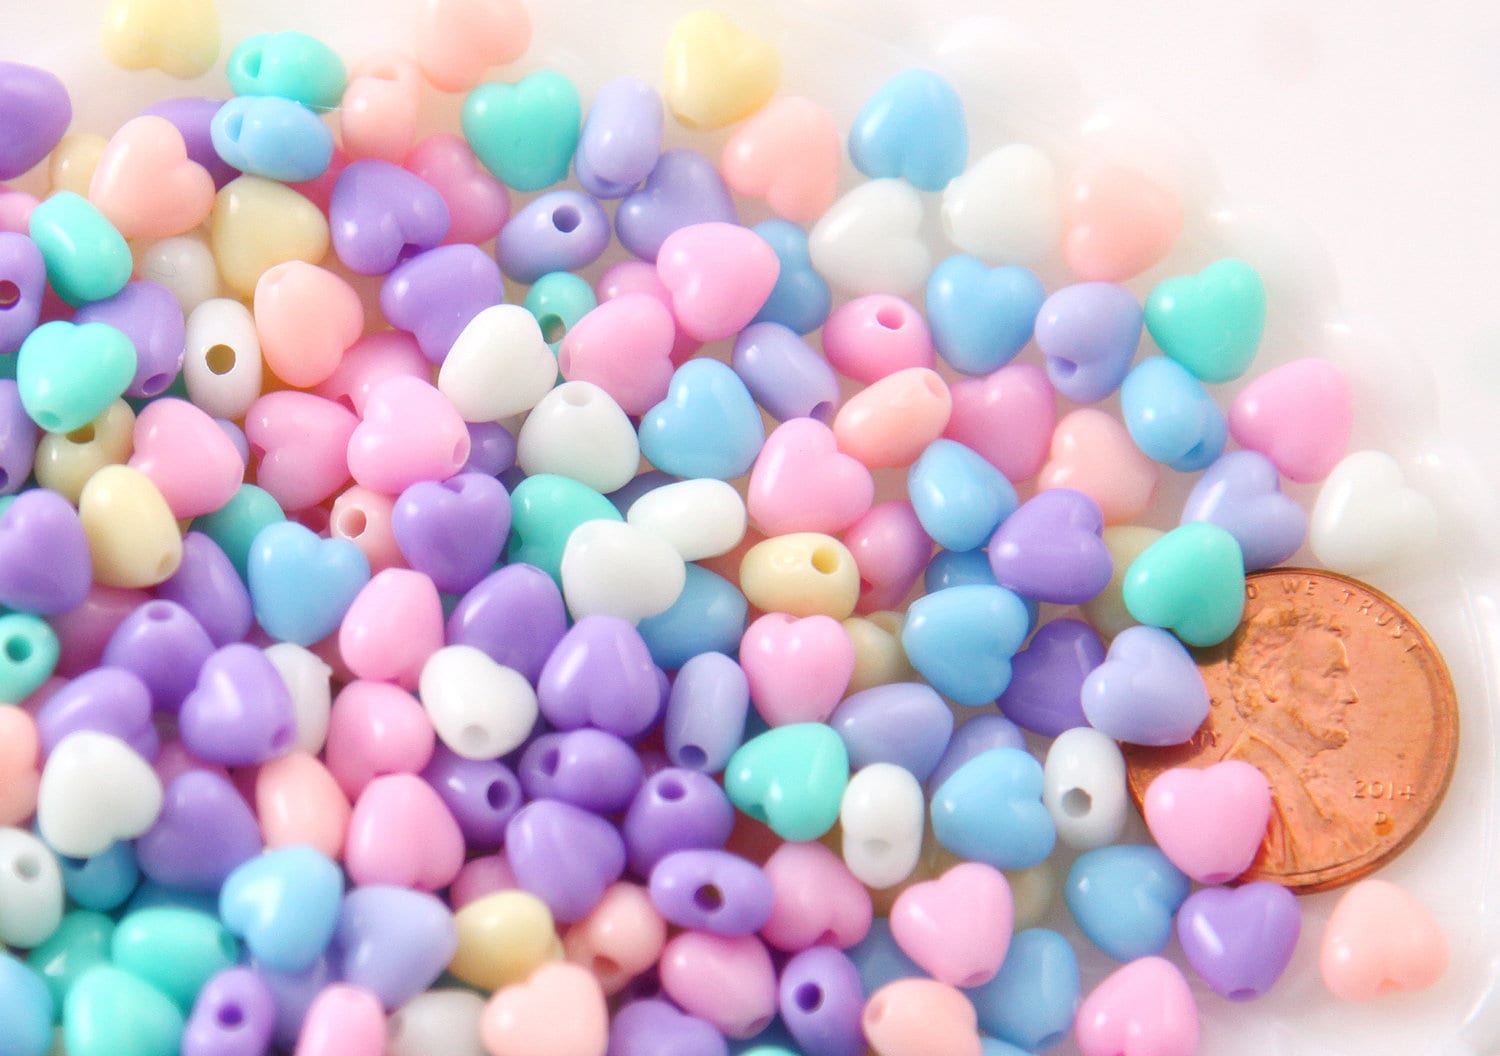 200 Pieces Pastel Heart Beads Bulk for Jewelry Making Pony Acrylic Heart  Beads Colorful Plastic Pastel Beads Assorted Rainbow Color Heart Shape  Beads